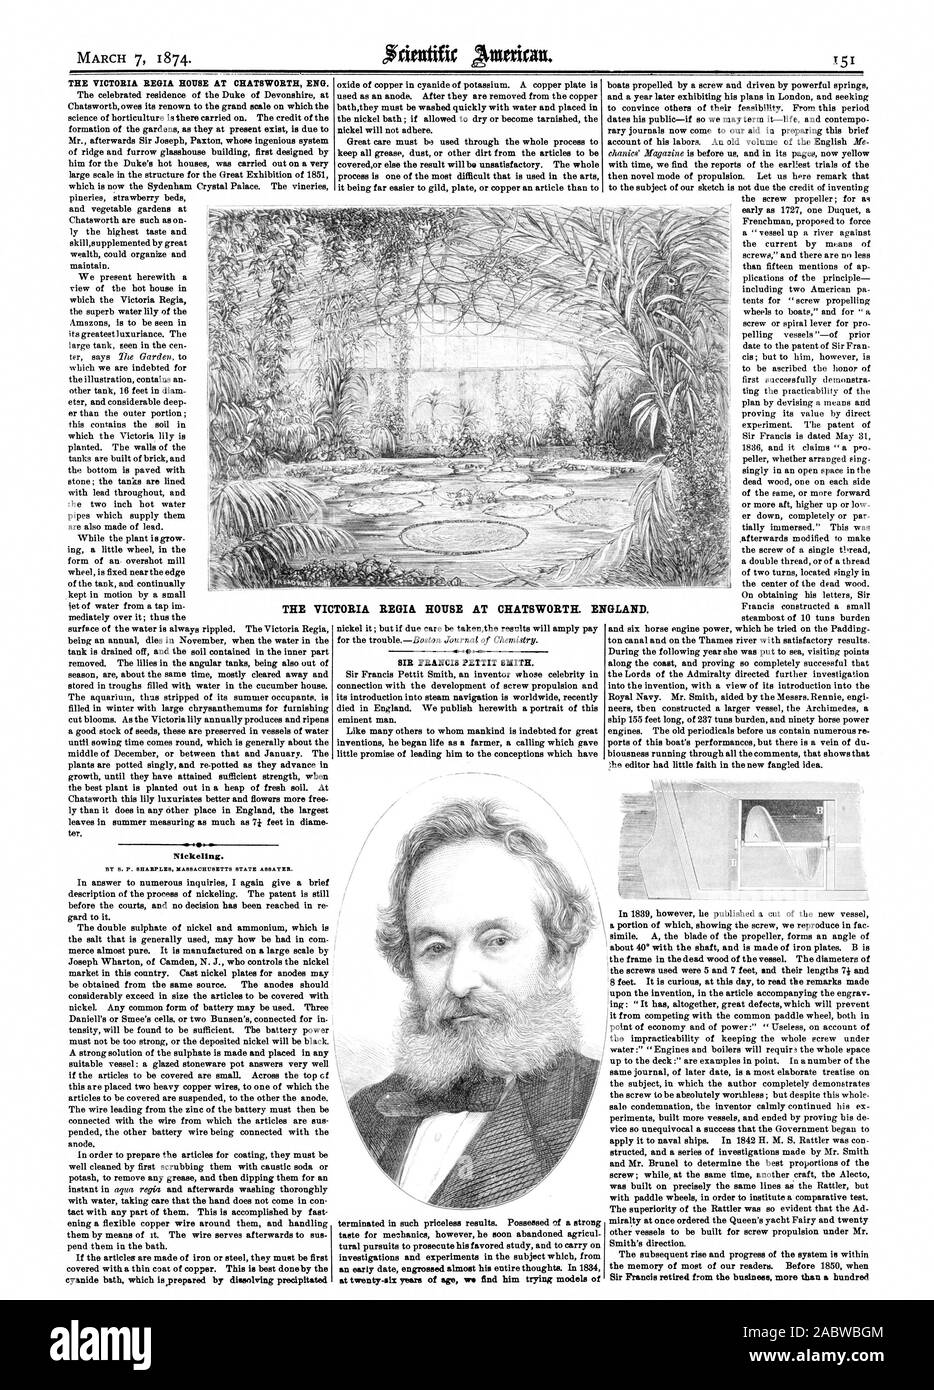 Nickeling. THE VICTORIA REGIA HOUSE AT CHATSWORTH. ENGLAND., scientific american, 1874-03-07 Stock Photo